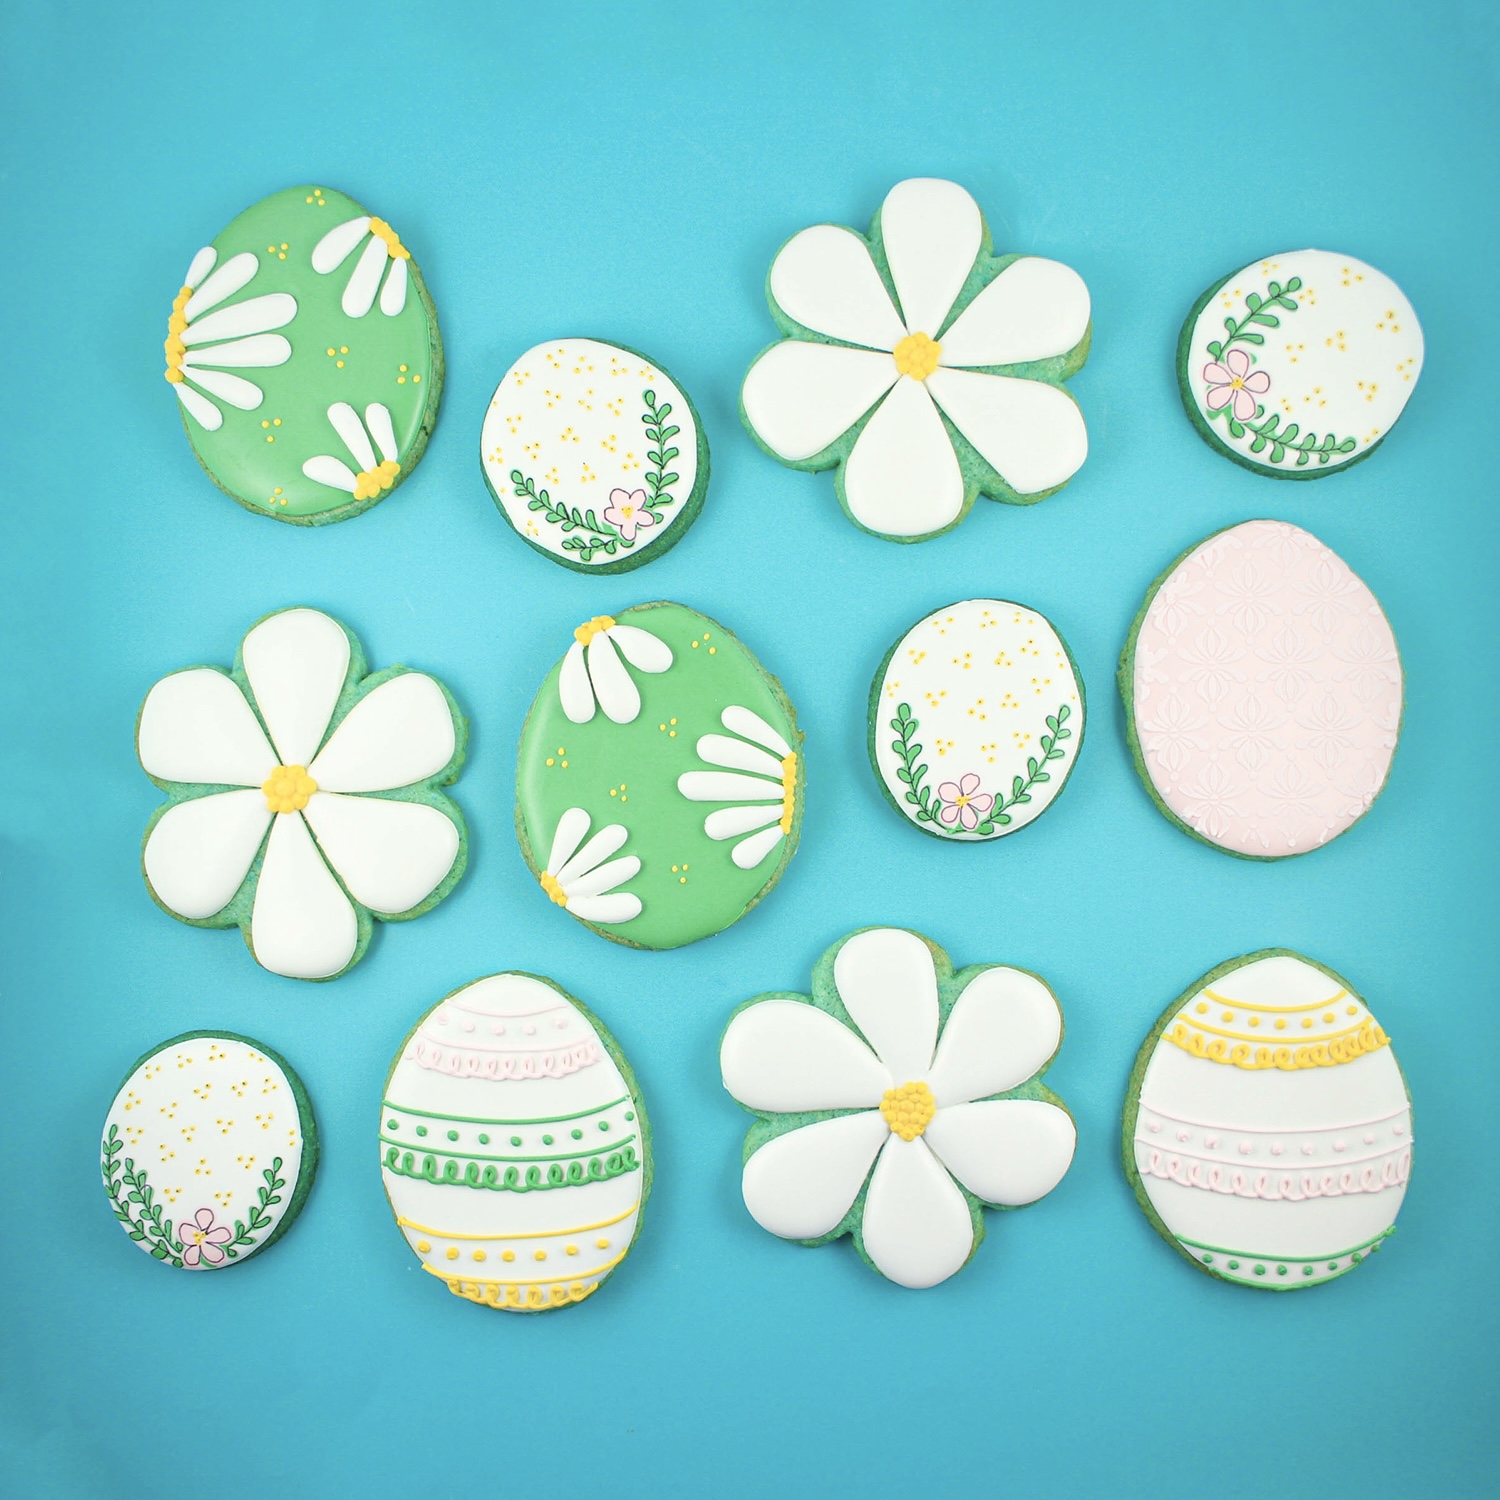 Blue Easter Royal Icing Cookies